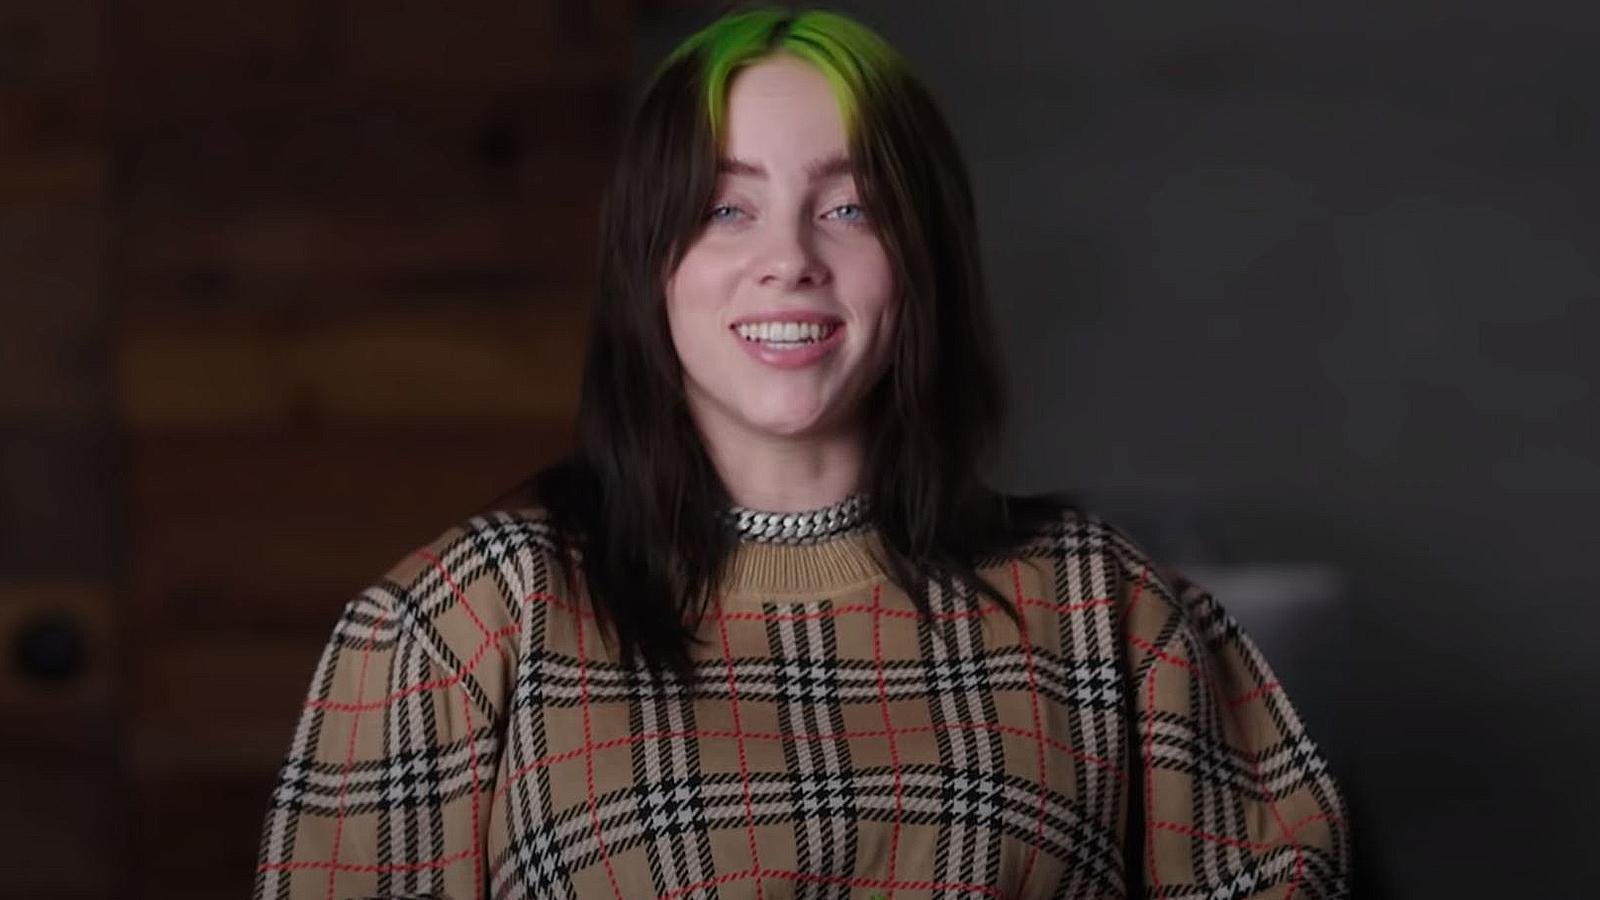 Billie Eilish speaks to the camera during an interview with Vanity Fair.